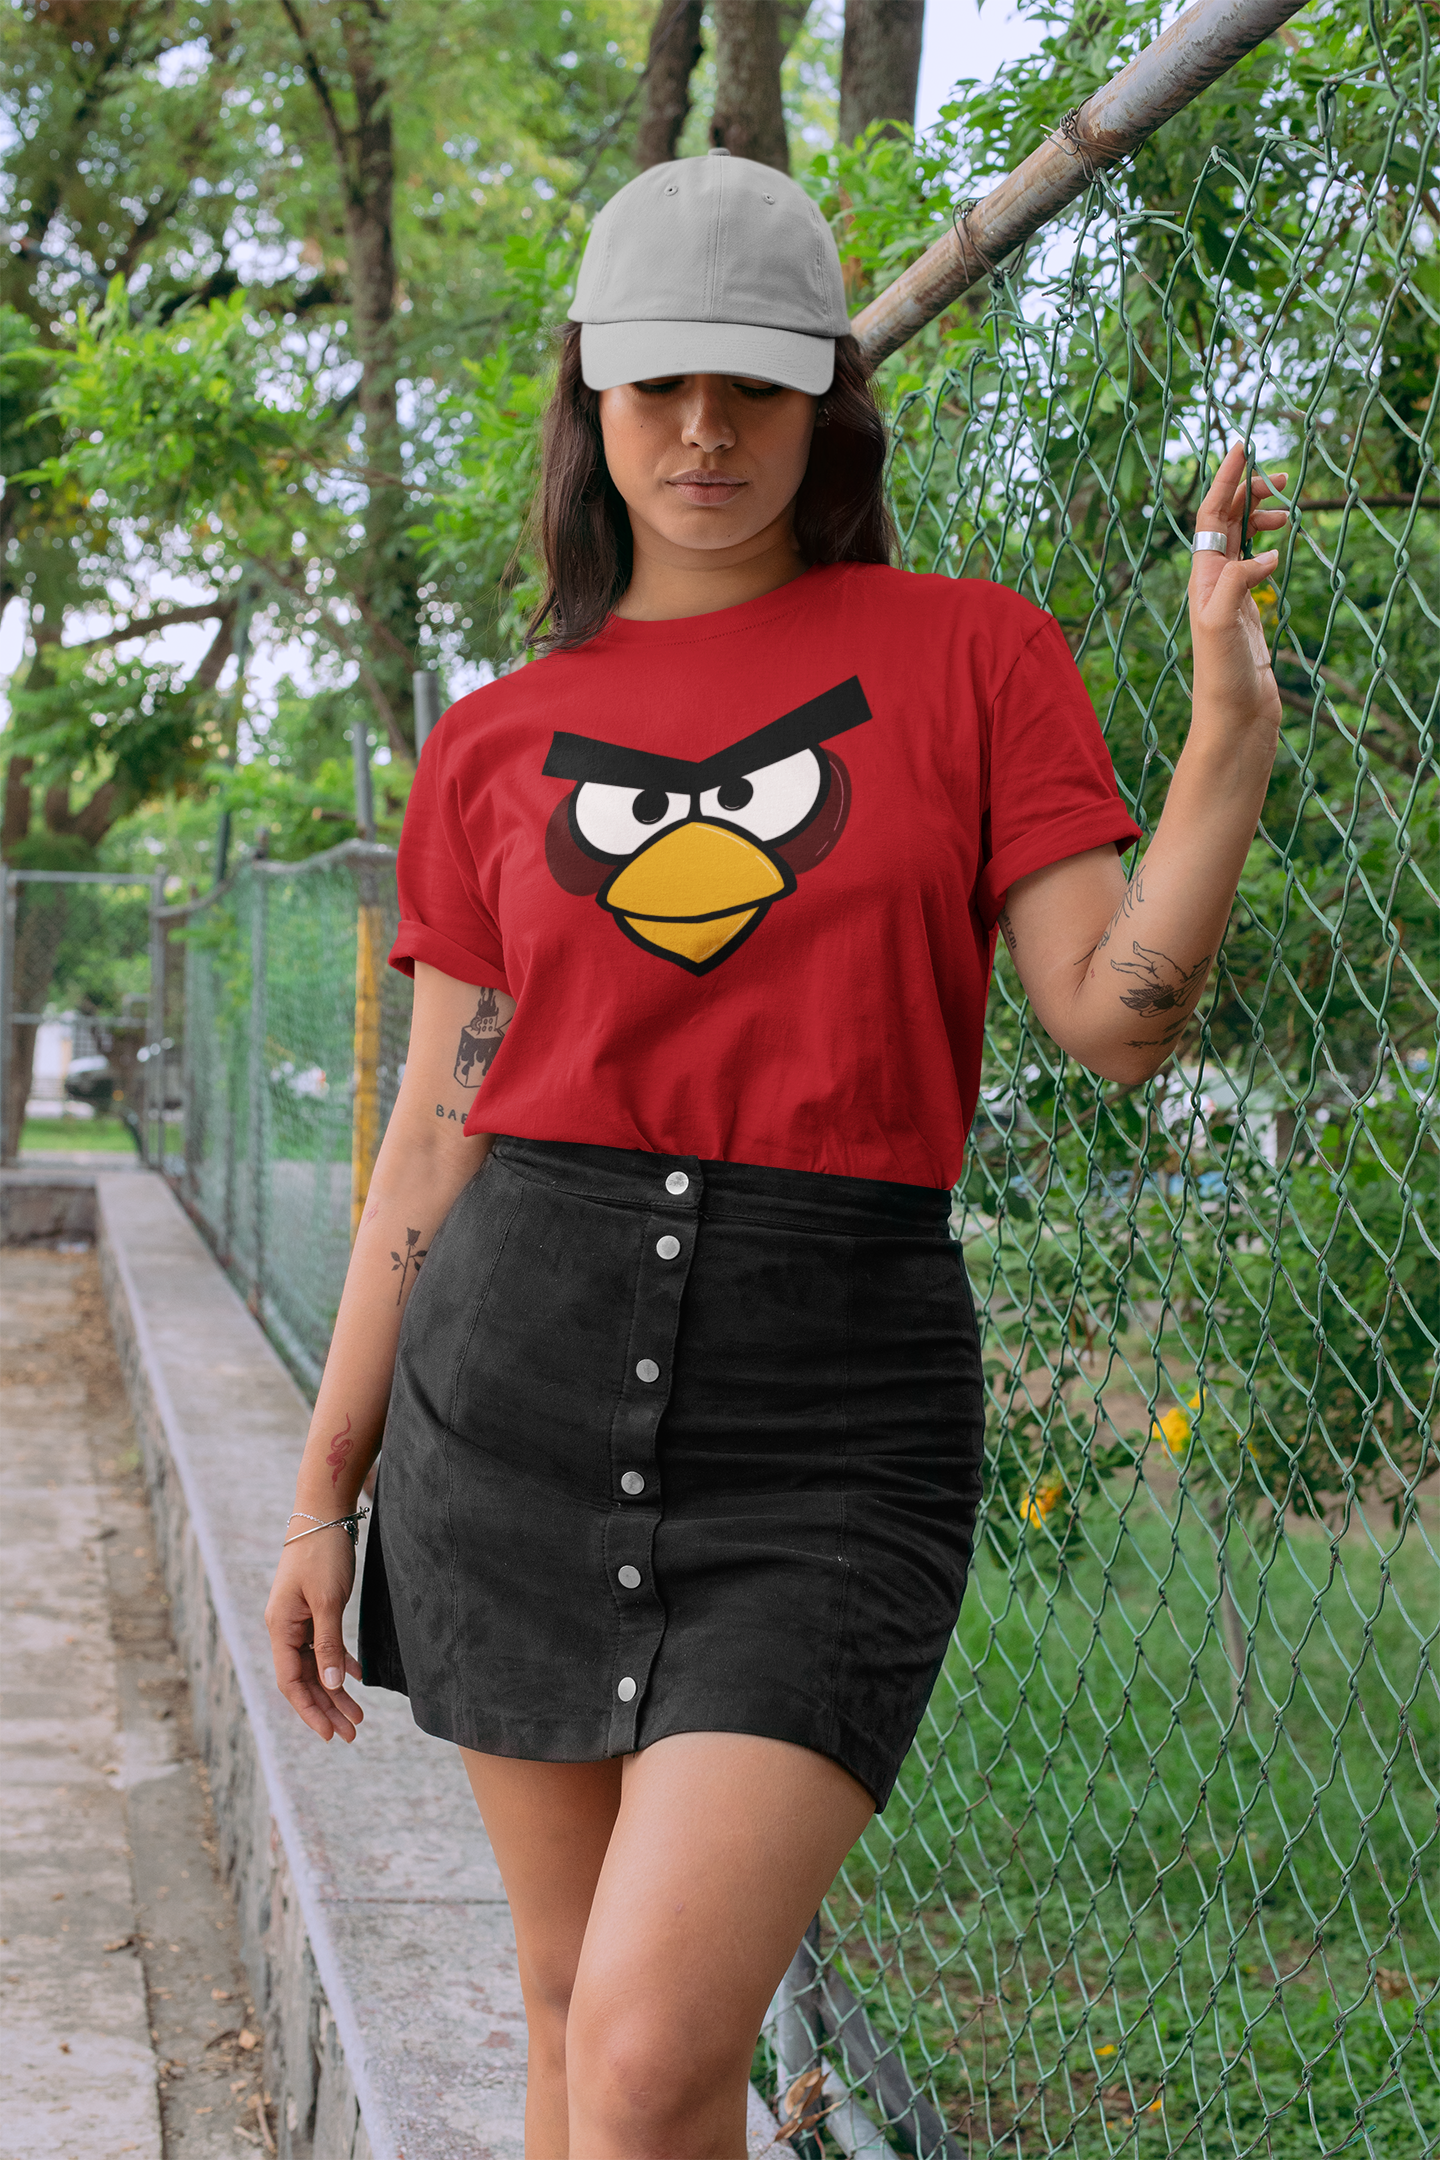 Angry Birds Stop the Madness Girls T-Shirt